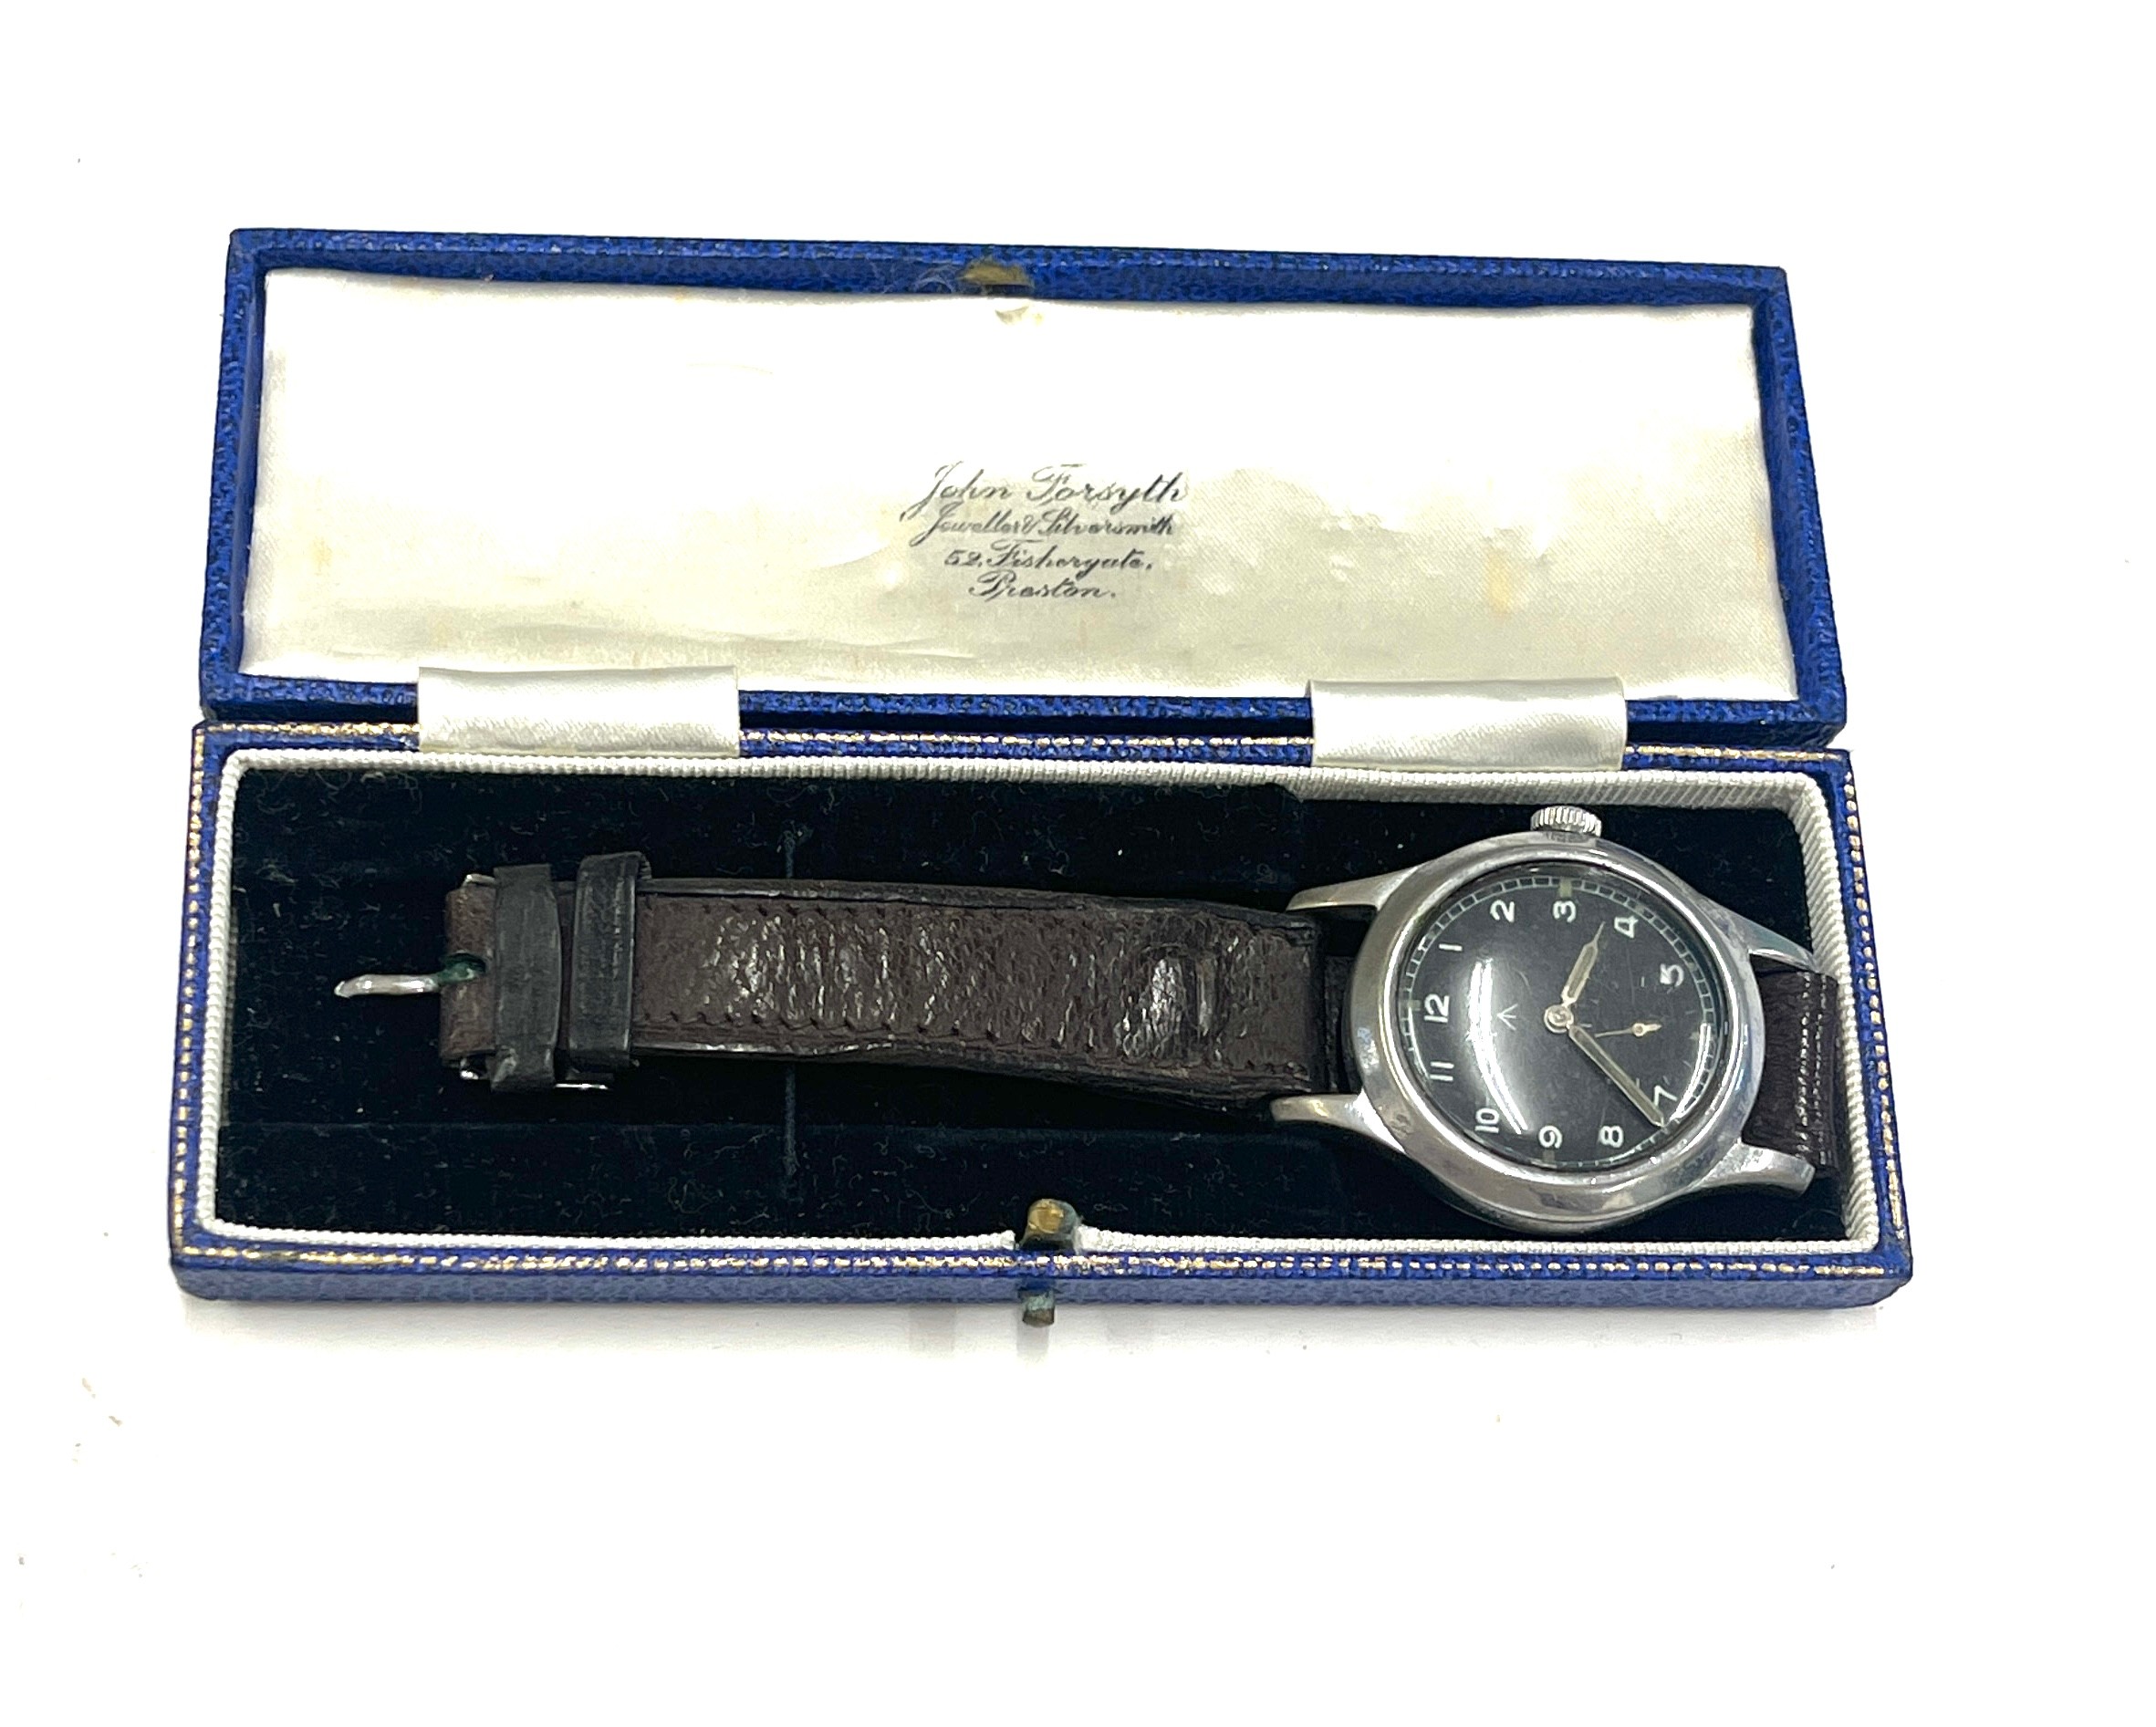 WW2 dirty dozen Jaeger military wristwatch, winds and ticks but no warranty given - Image 3 of 5